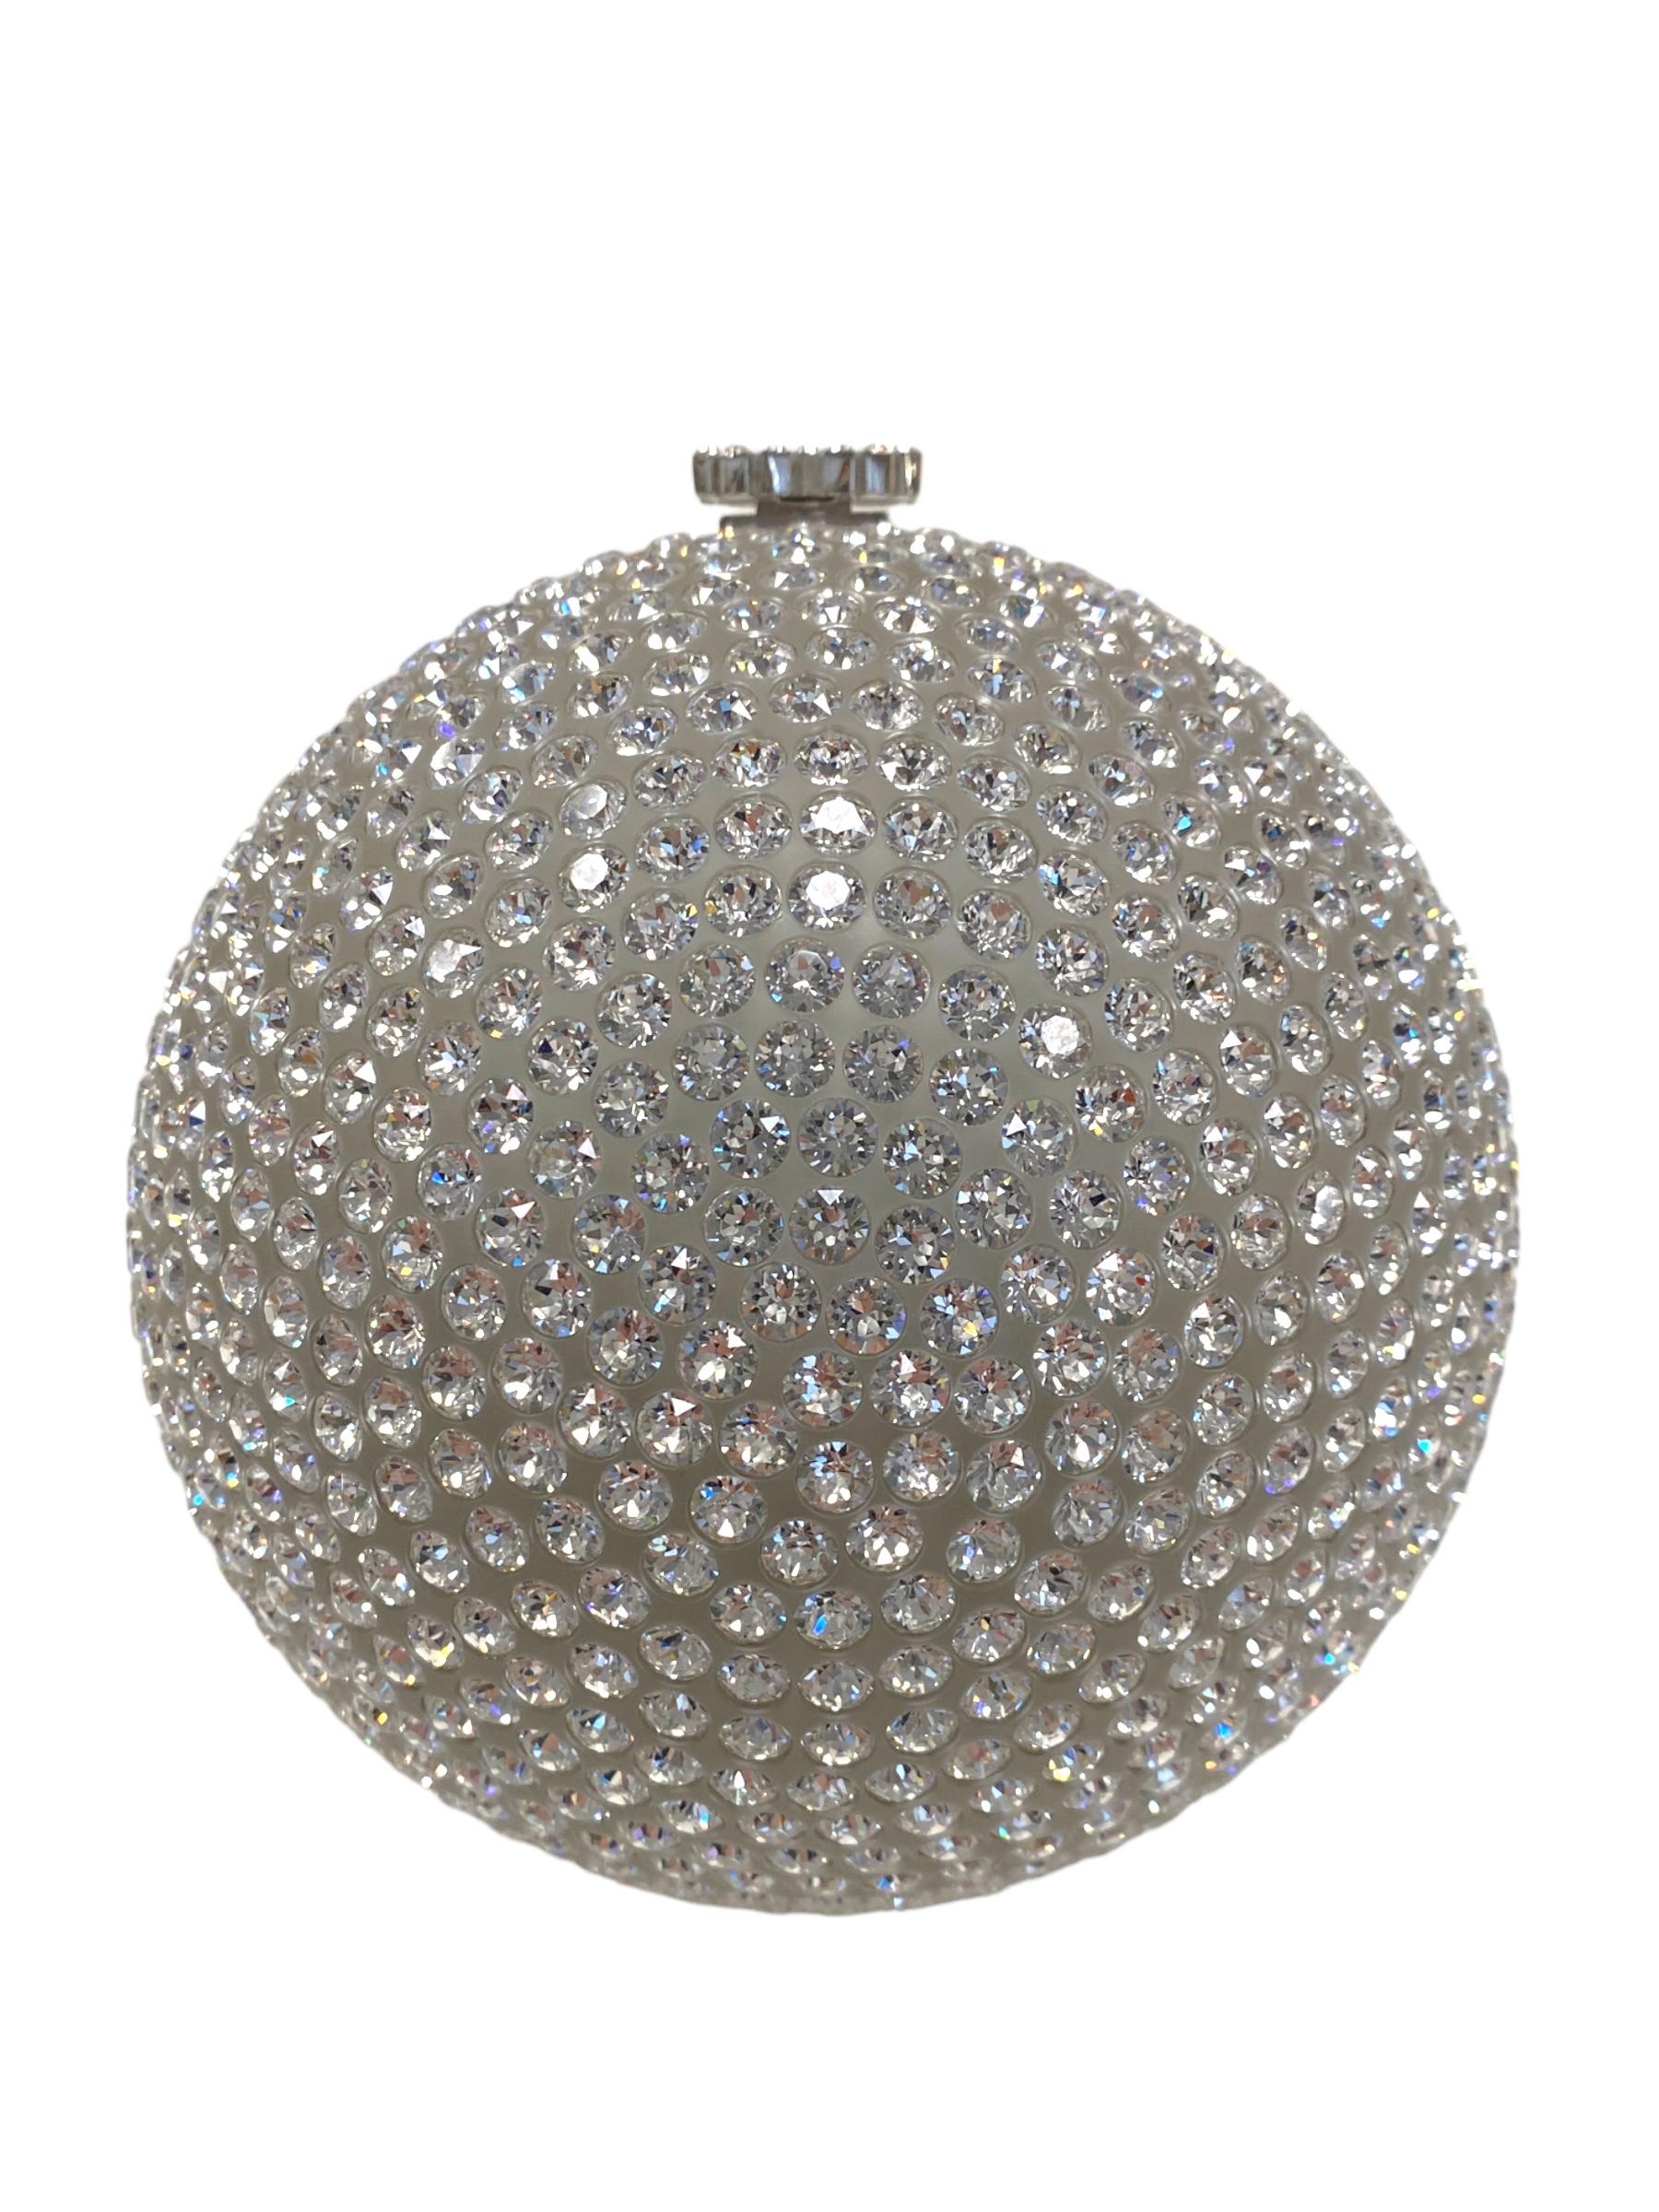 Chanel Minaudière Limited Edition Crystal Ball Evening Clutch 2